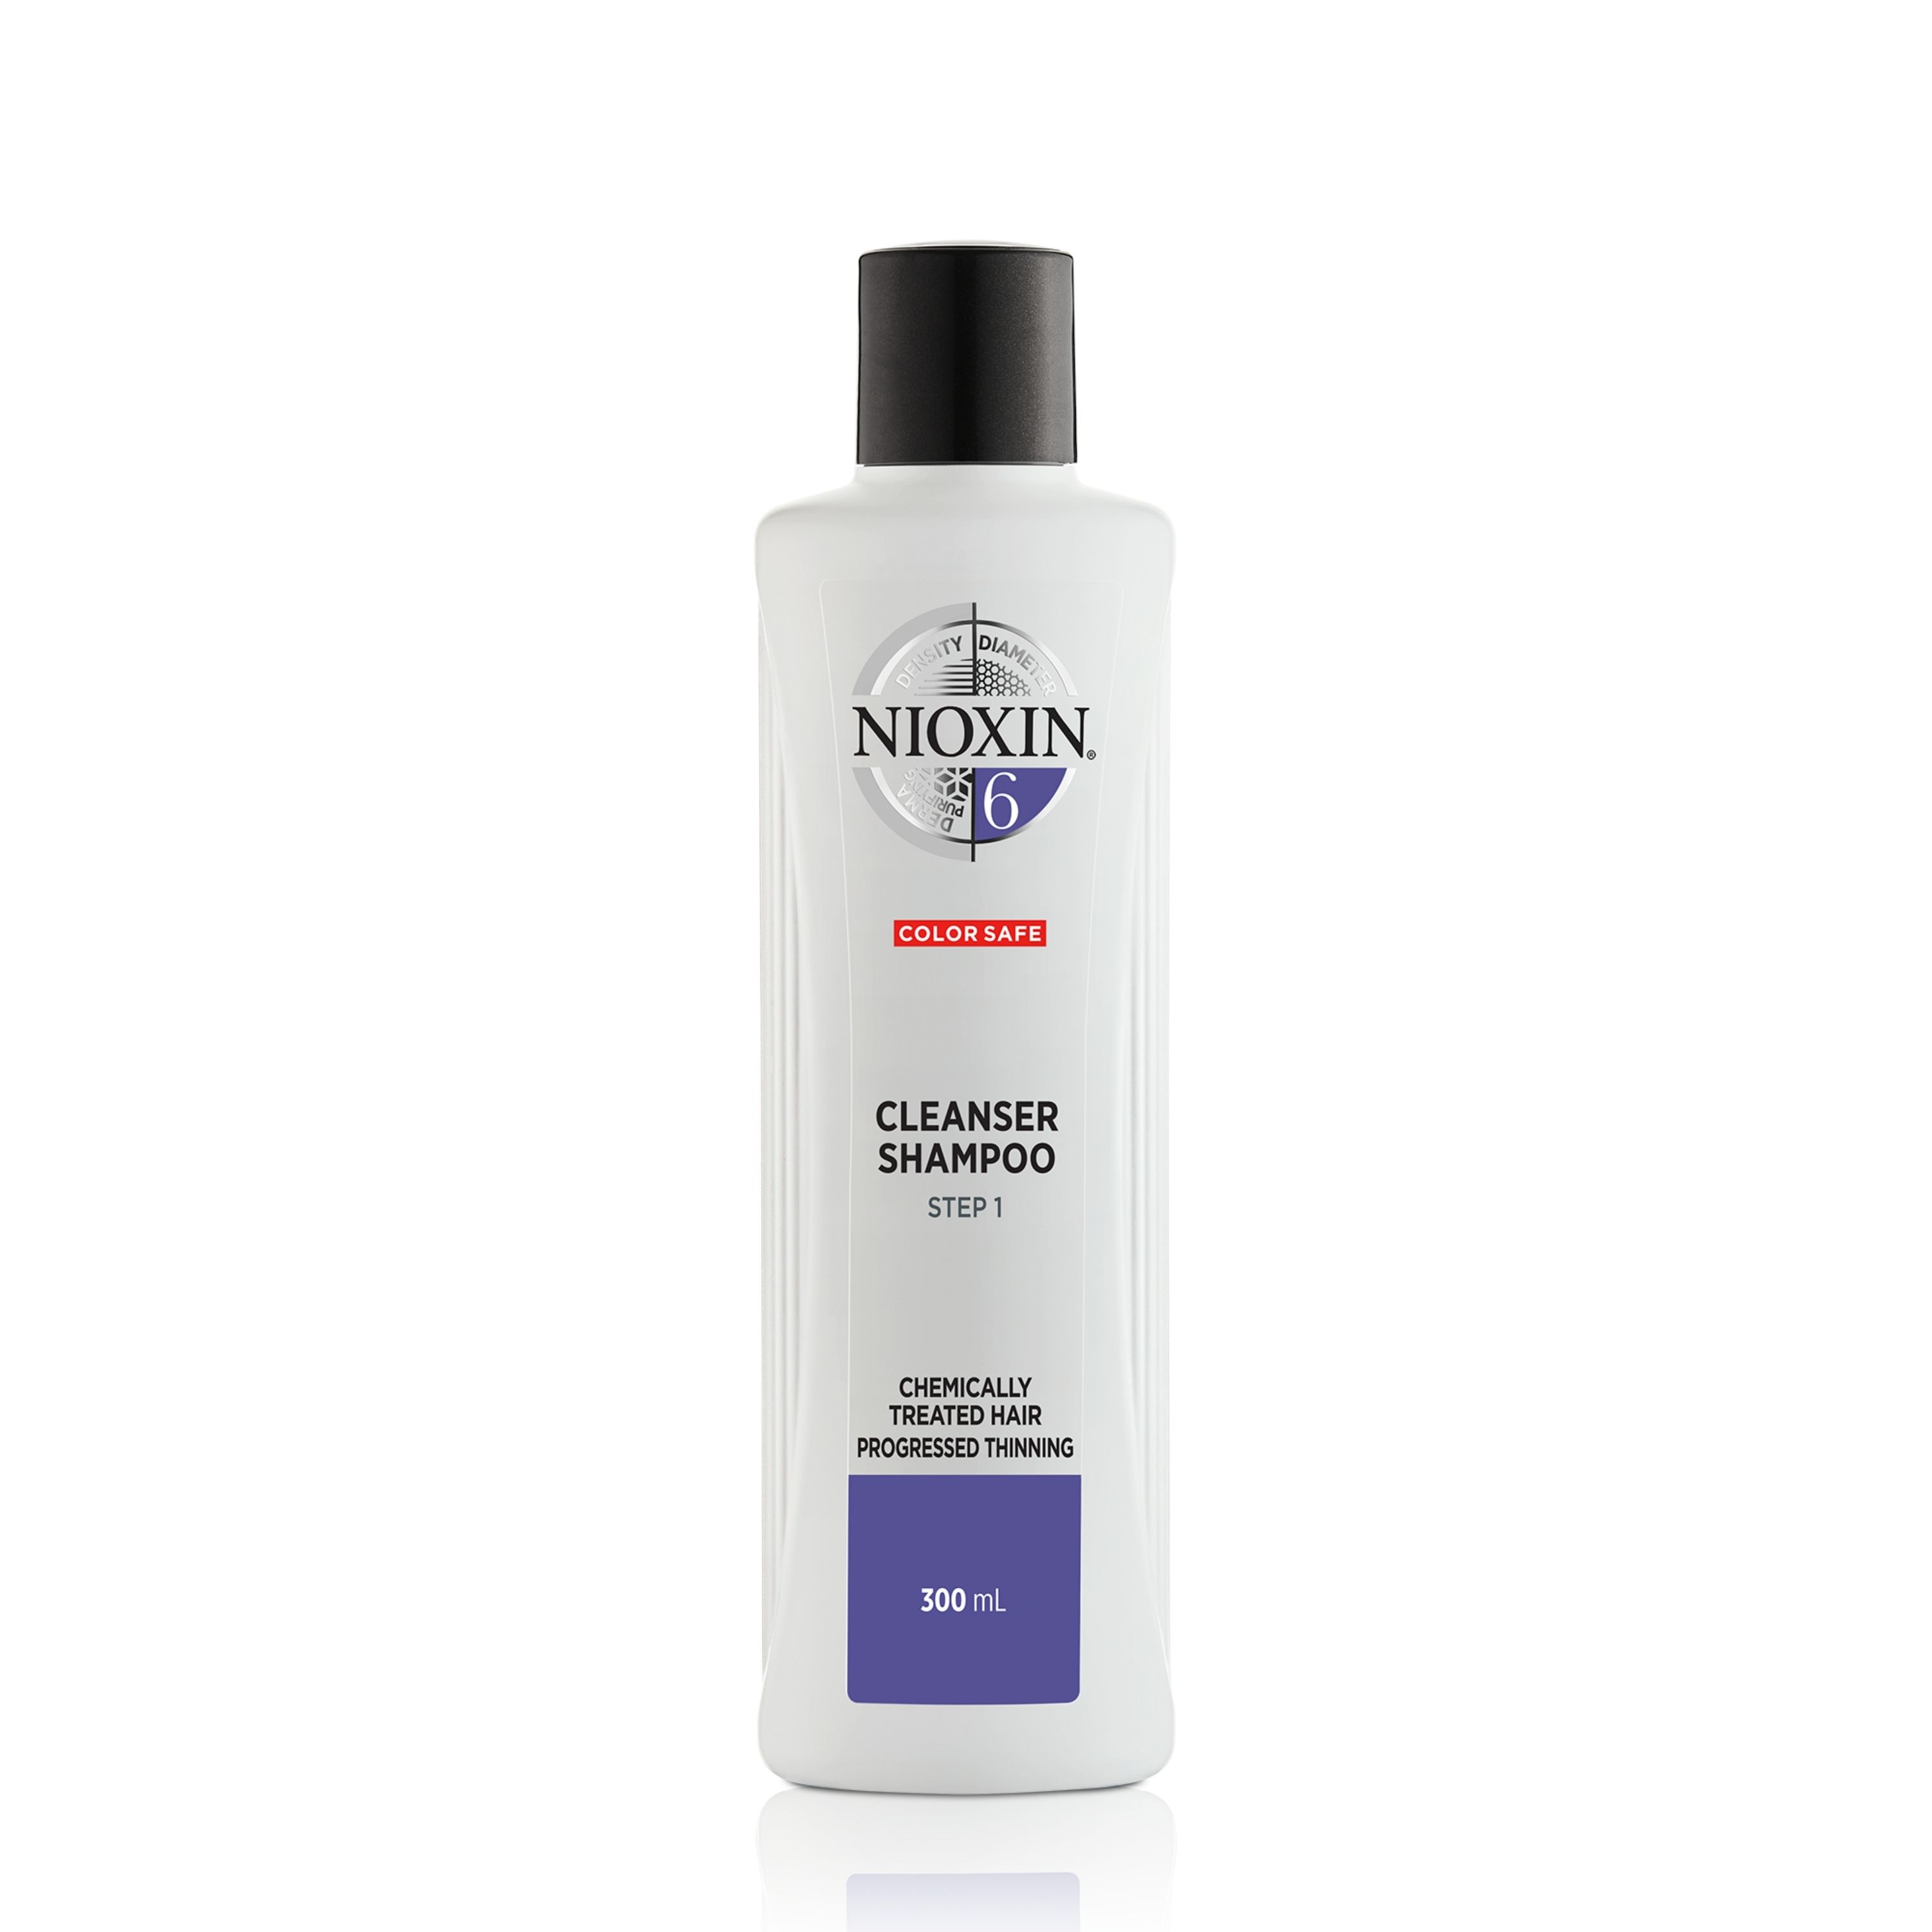 Image of Nioxin System 6 Cleanser Shampoo 300ml